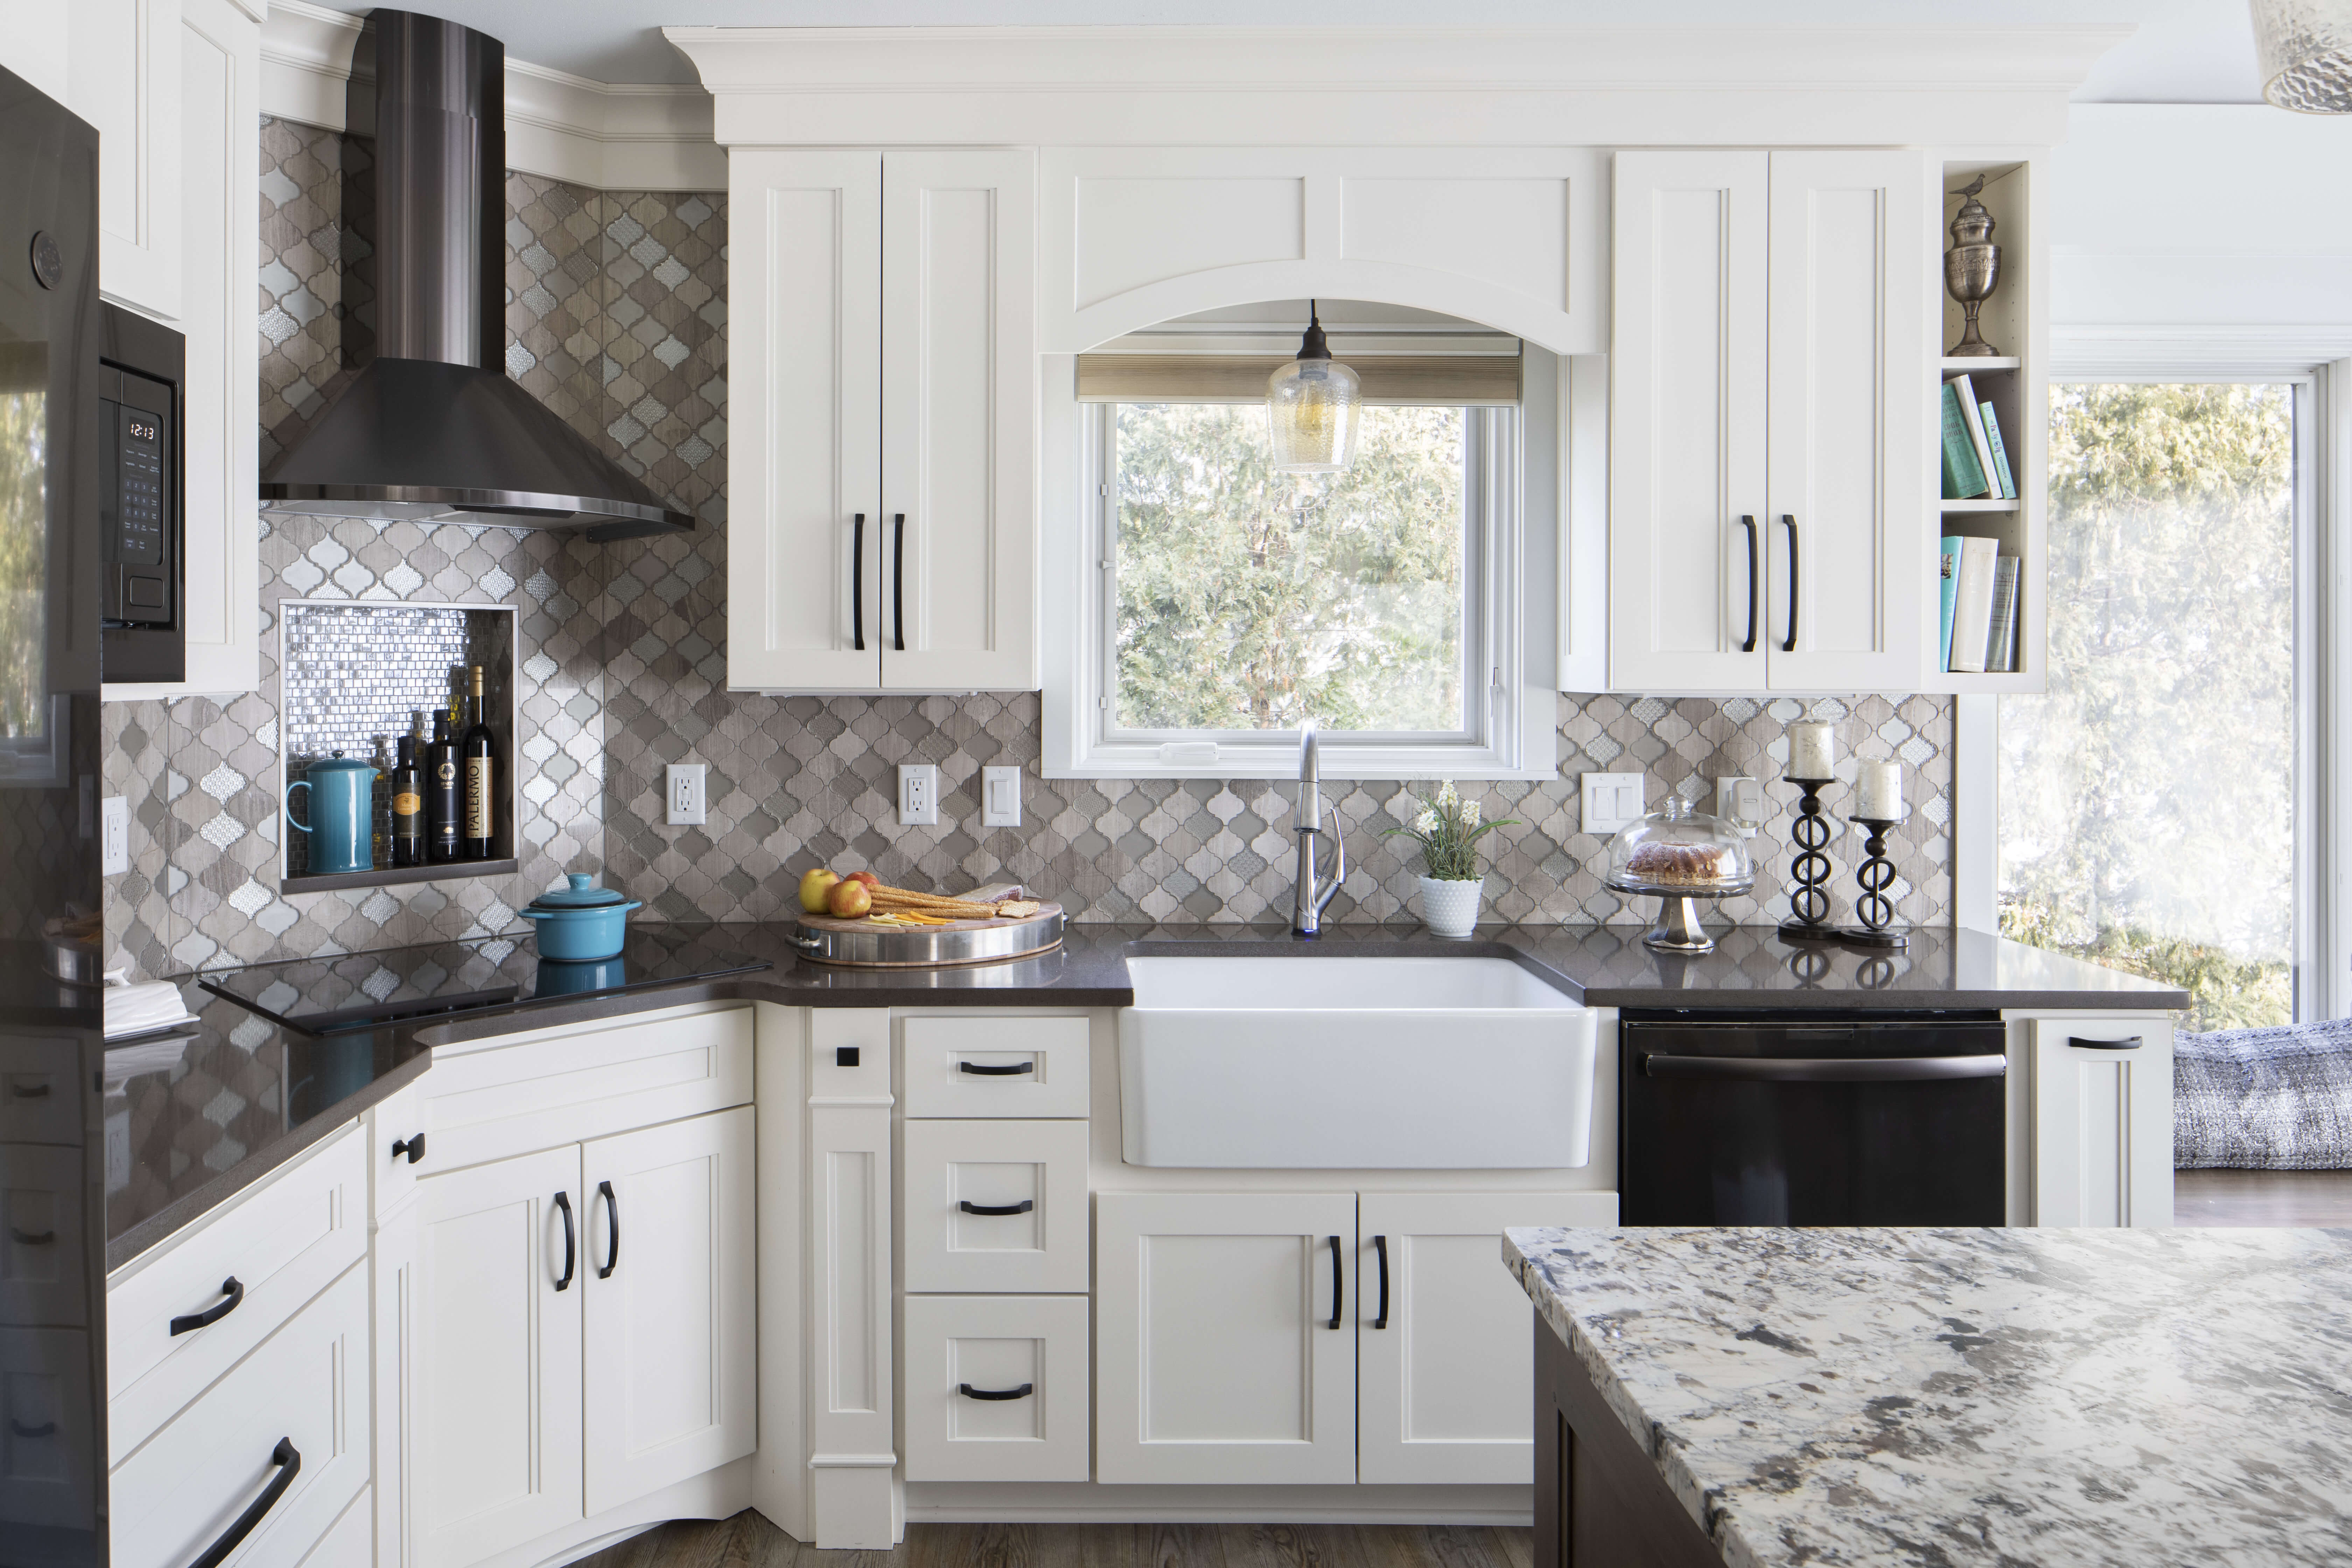 A transitional kitchen with white painted cabinets, black stainless steel appliances and black countertops.